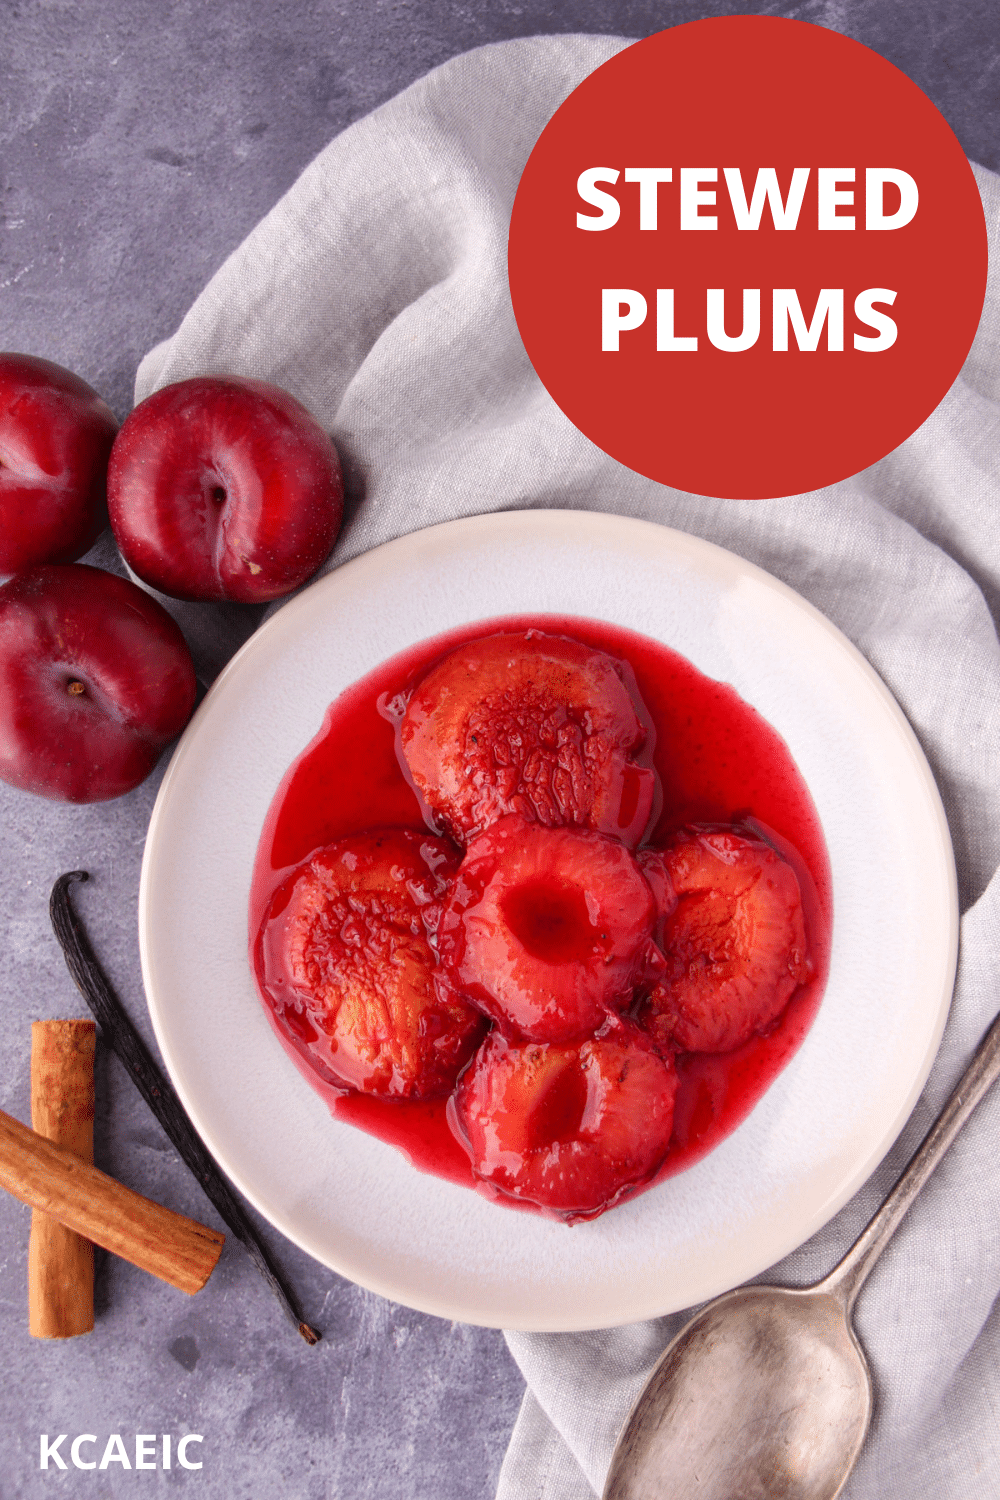 Stewed plums with a vintage serving spoon, fresh plums, cinnamon stick and vanilla pod on the side, with text overlay, Stewed plums, KCAEIC.